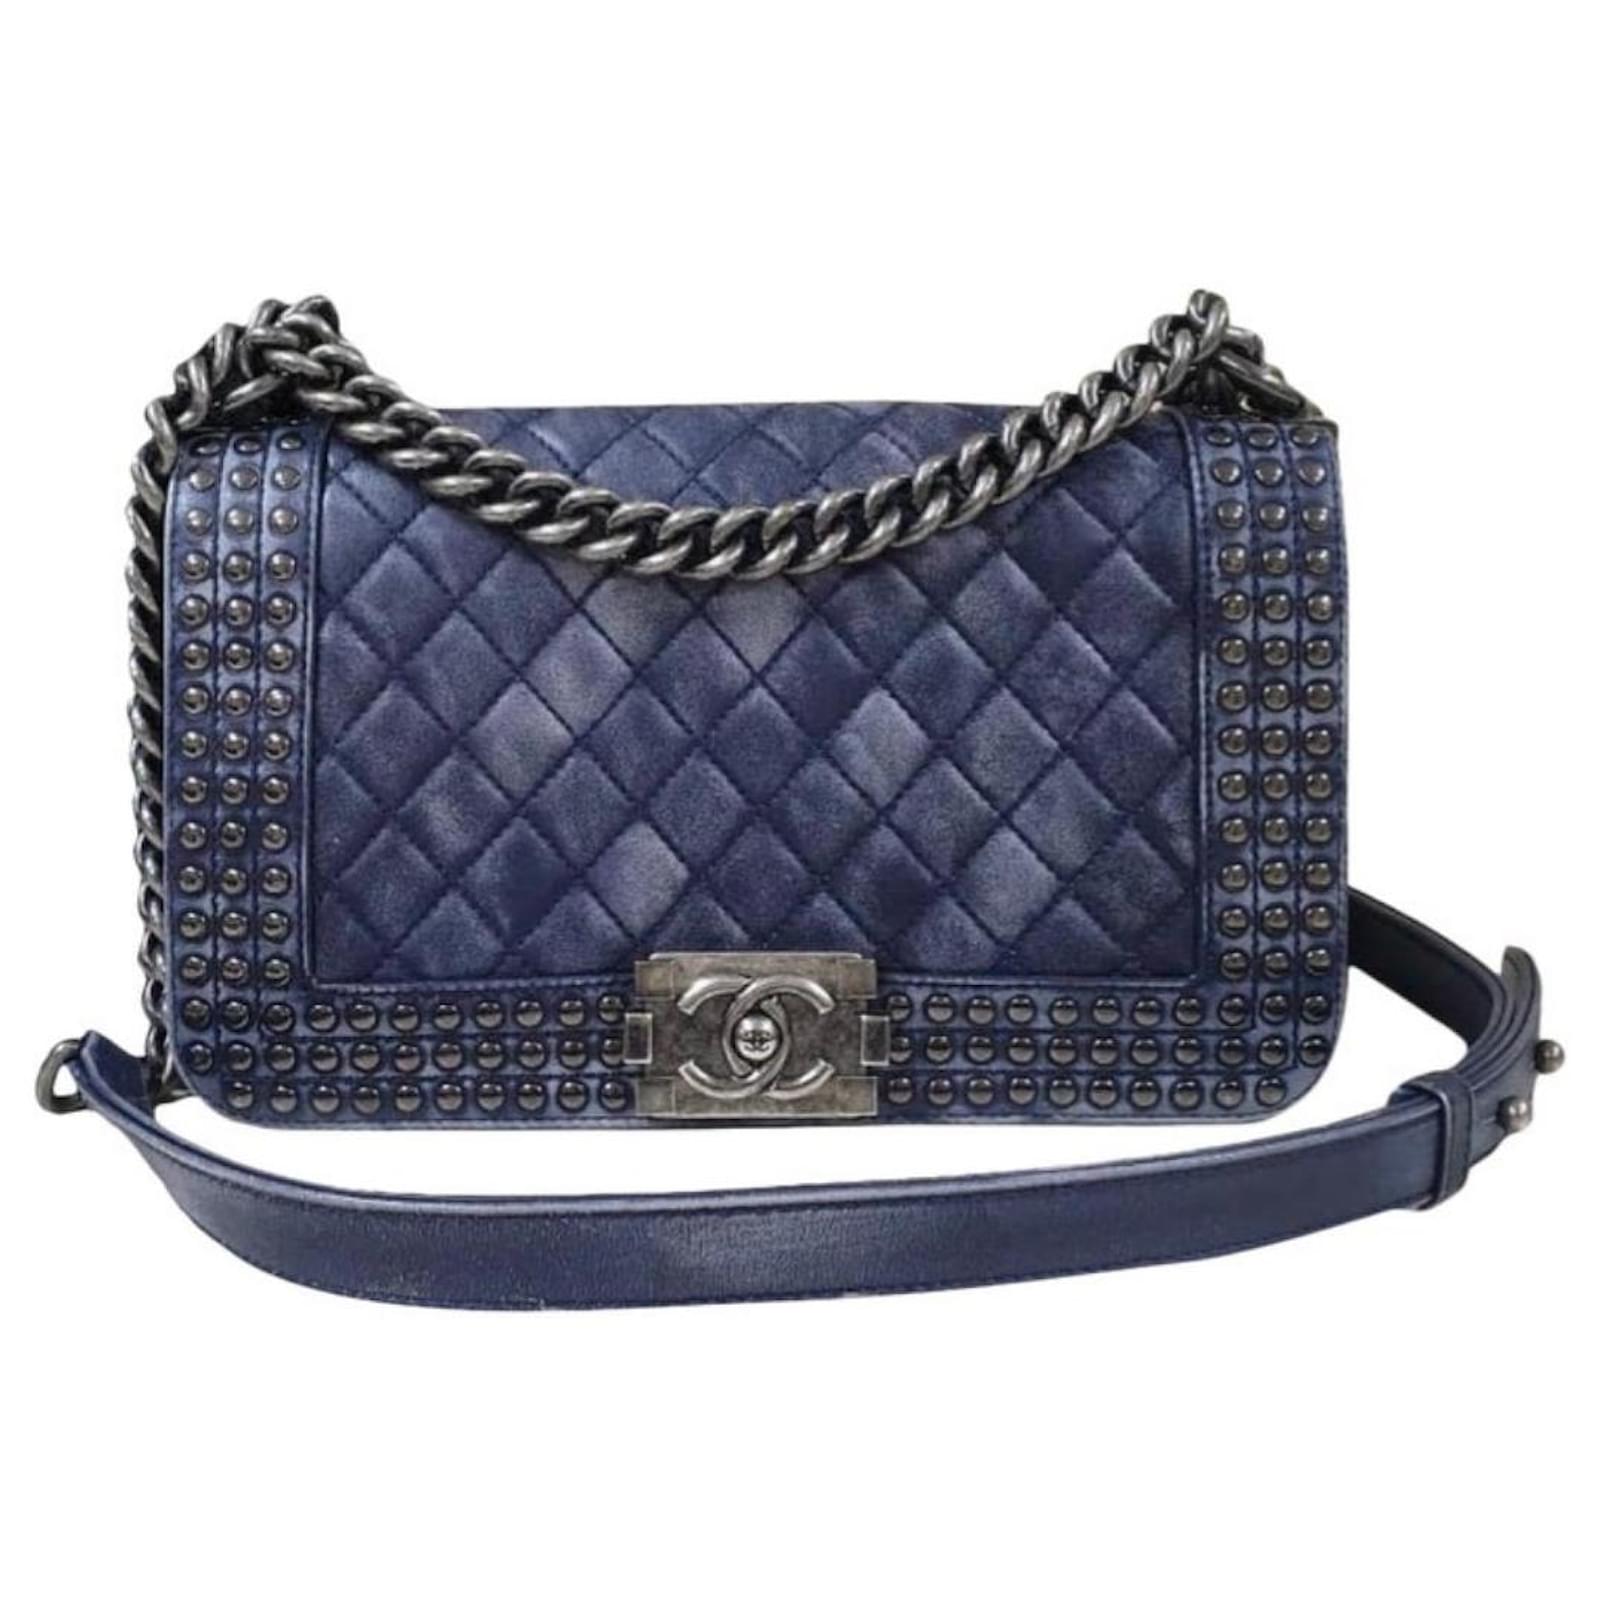 Chanel Blue Denim Quilted Leather Large Boy Flap Bag Chanel